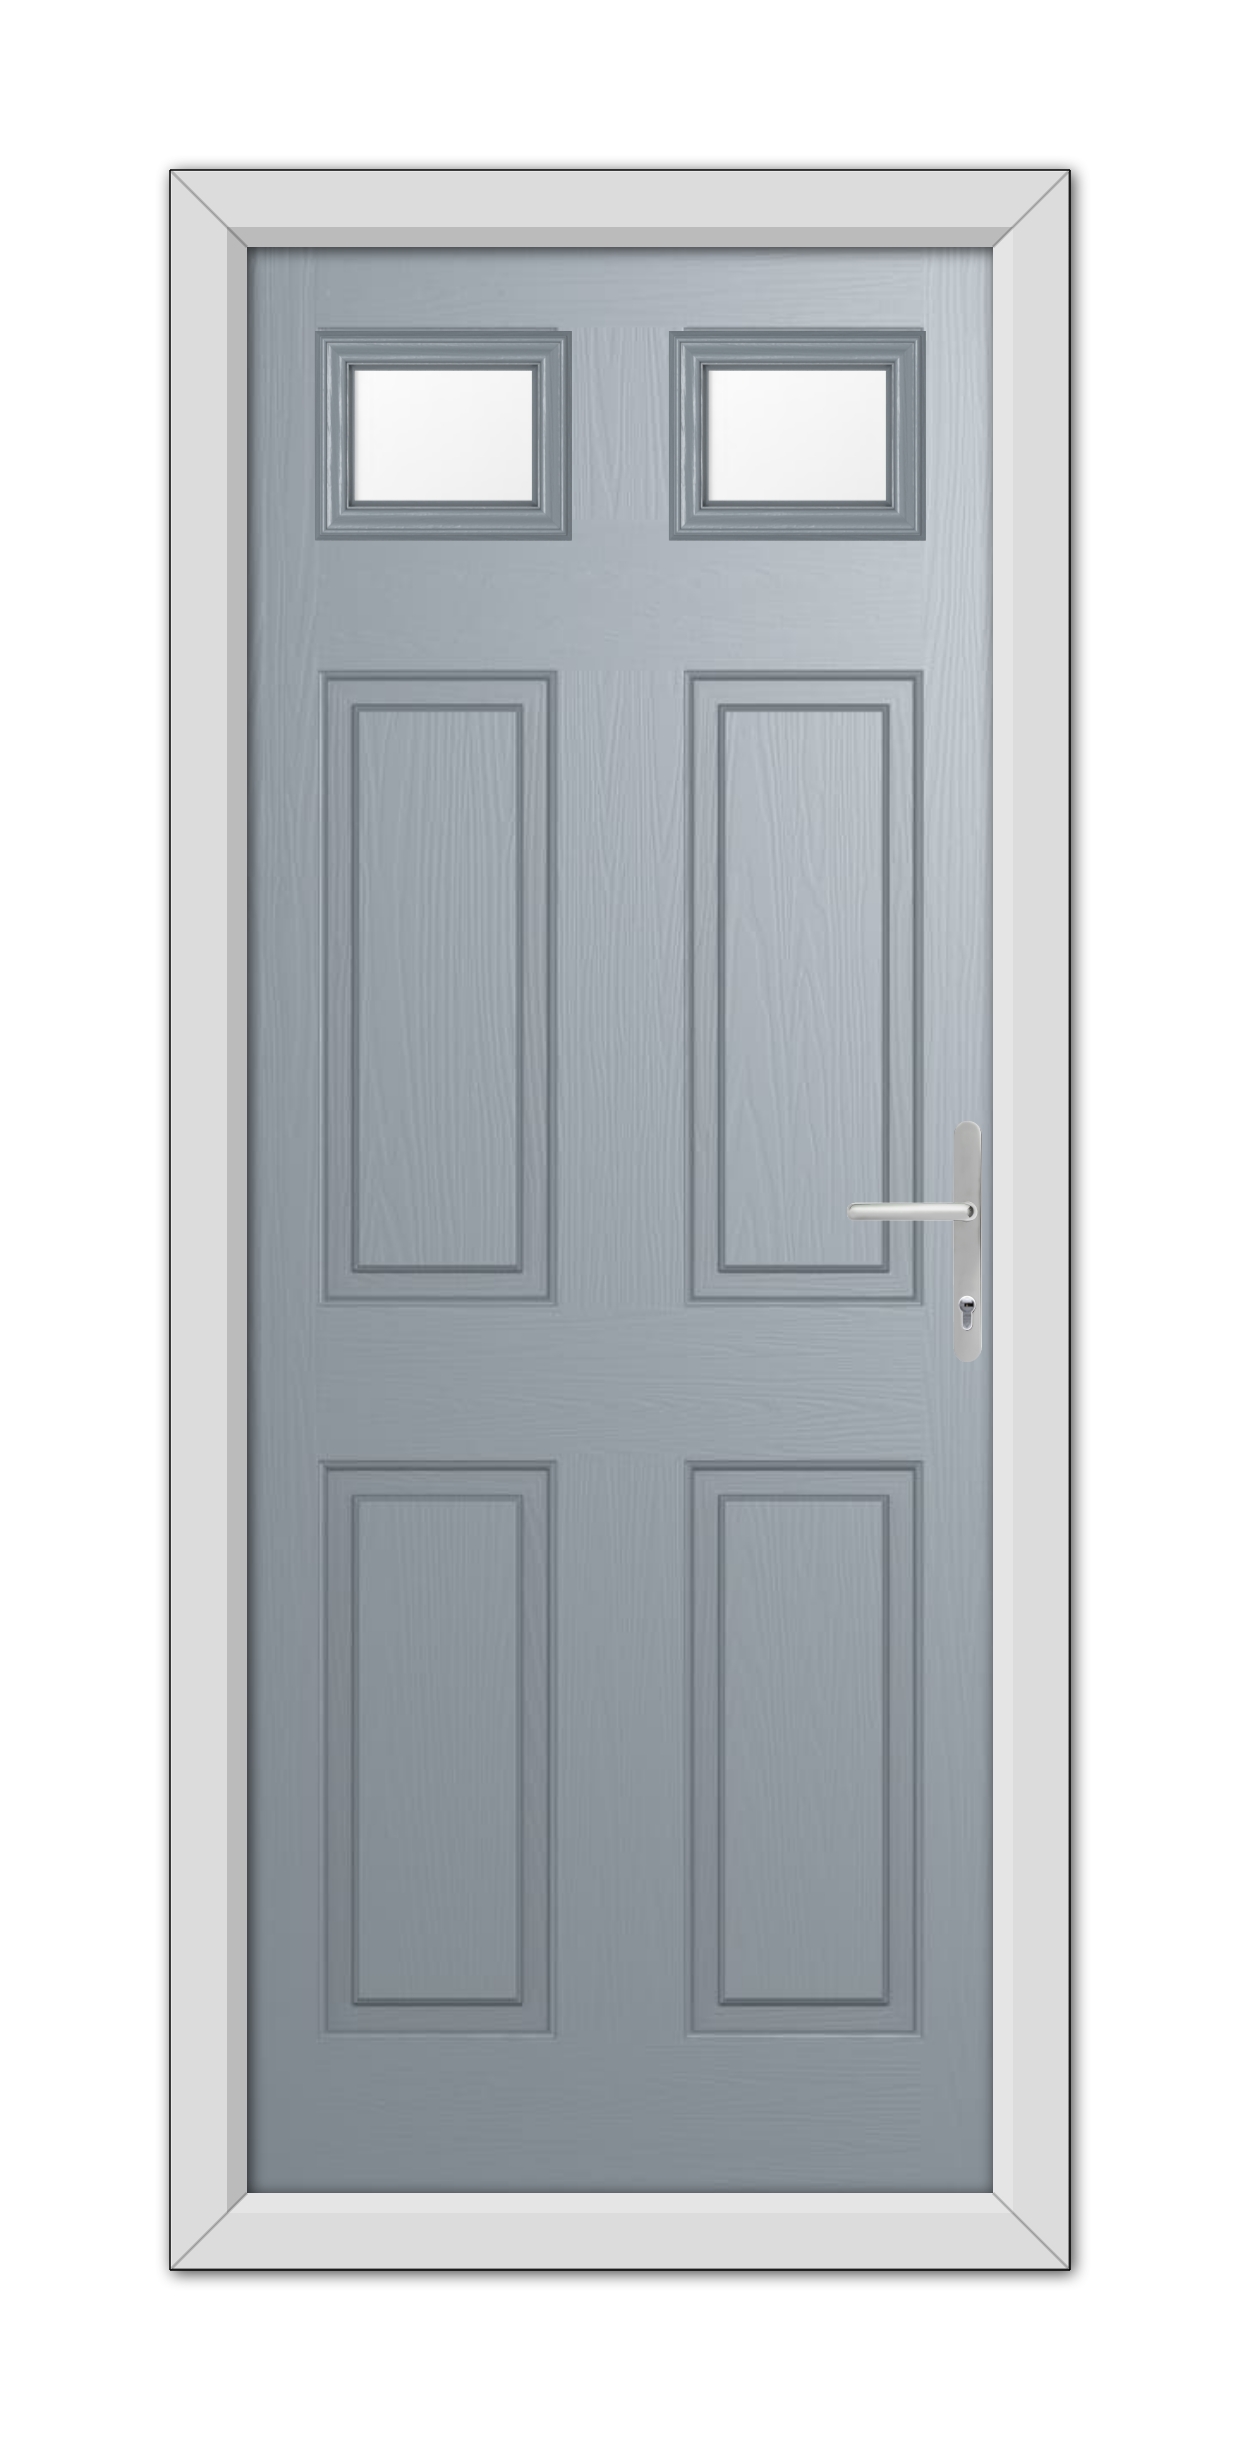 A French Grey Middleton Glazed 2 Composite Door featuring six panels and three small rectangular windows at the top, set in a white frame with a metallic handle on the right.